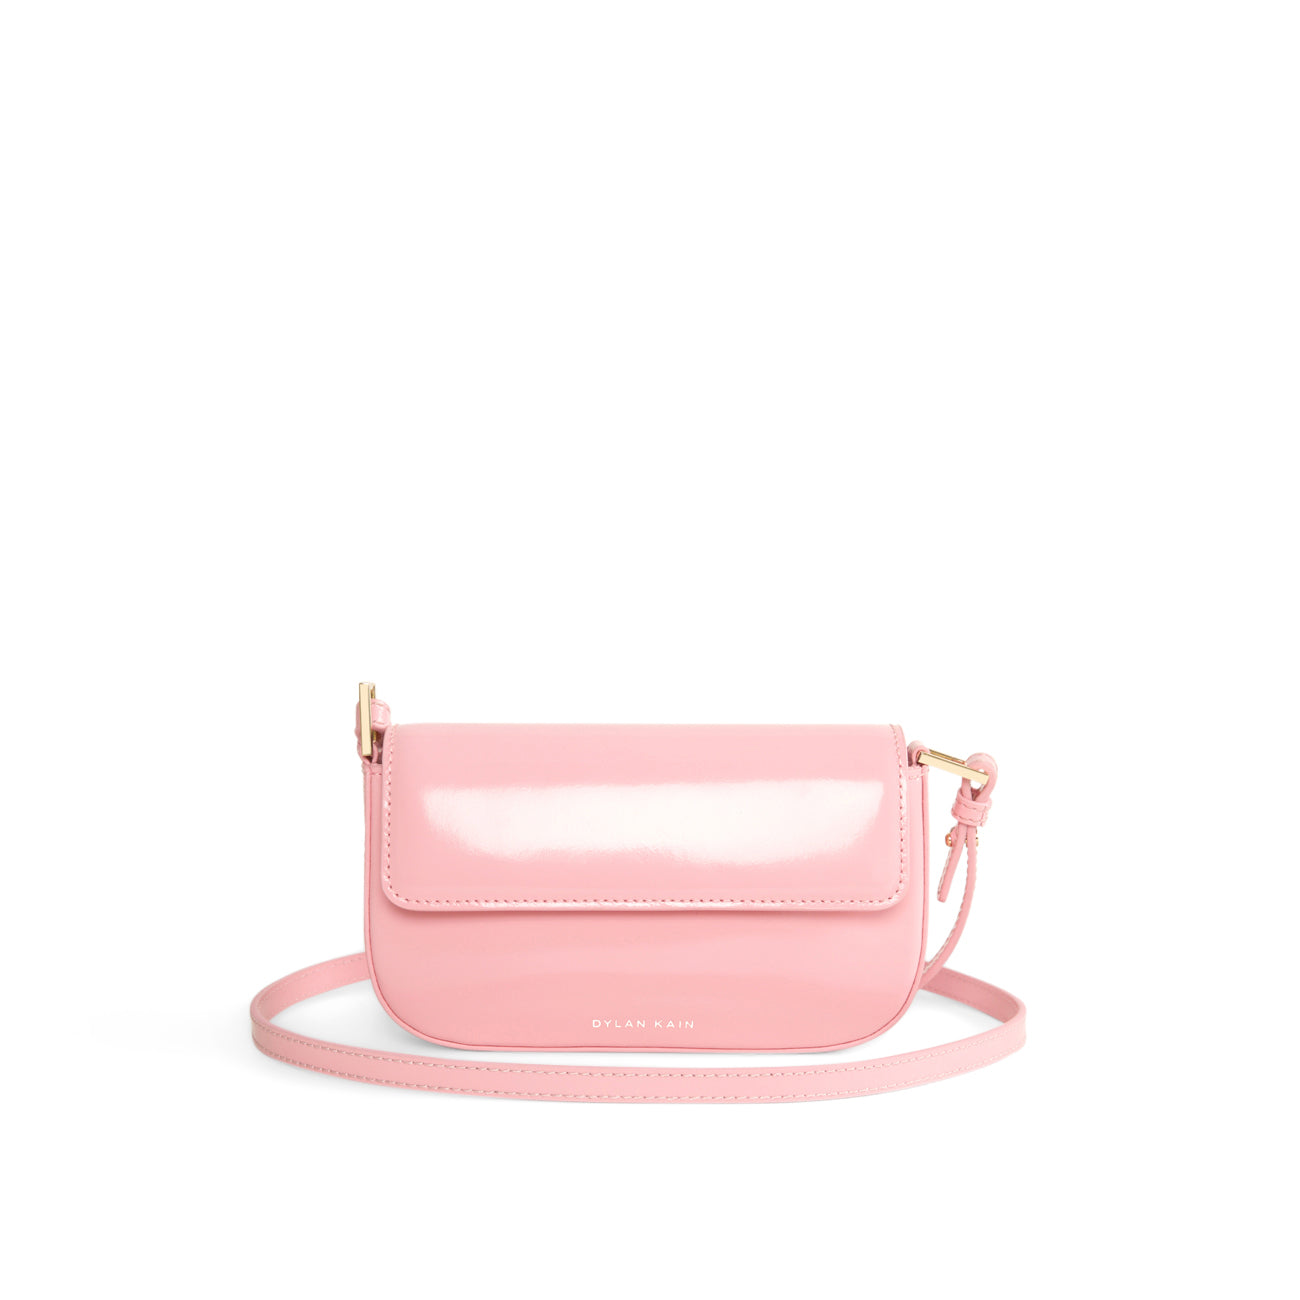 SAMPLE - The Amelia Patent Bag Candy Pink Light Gold